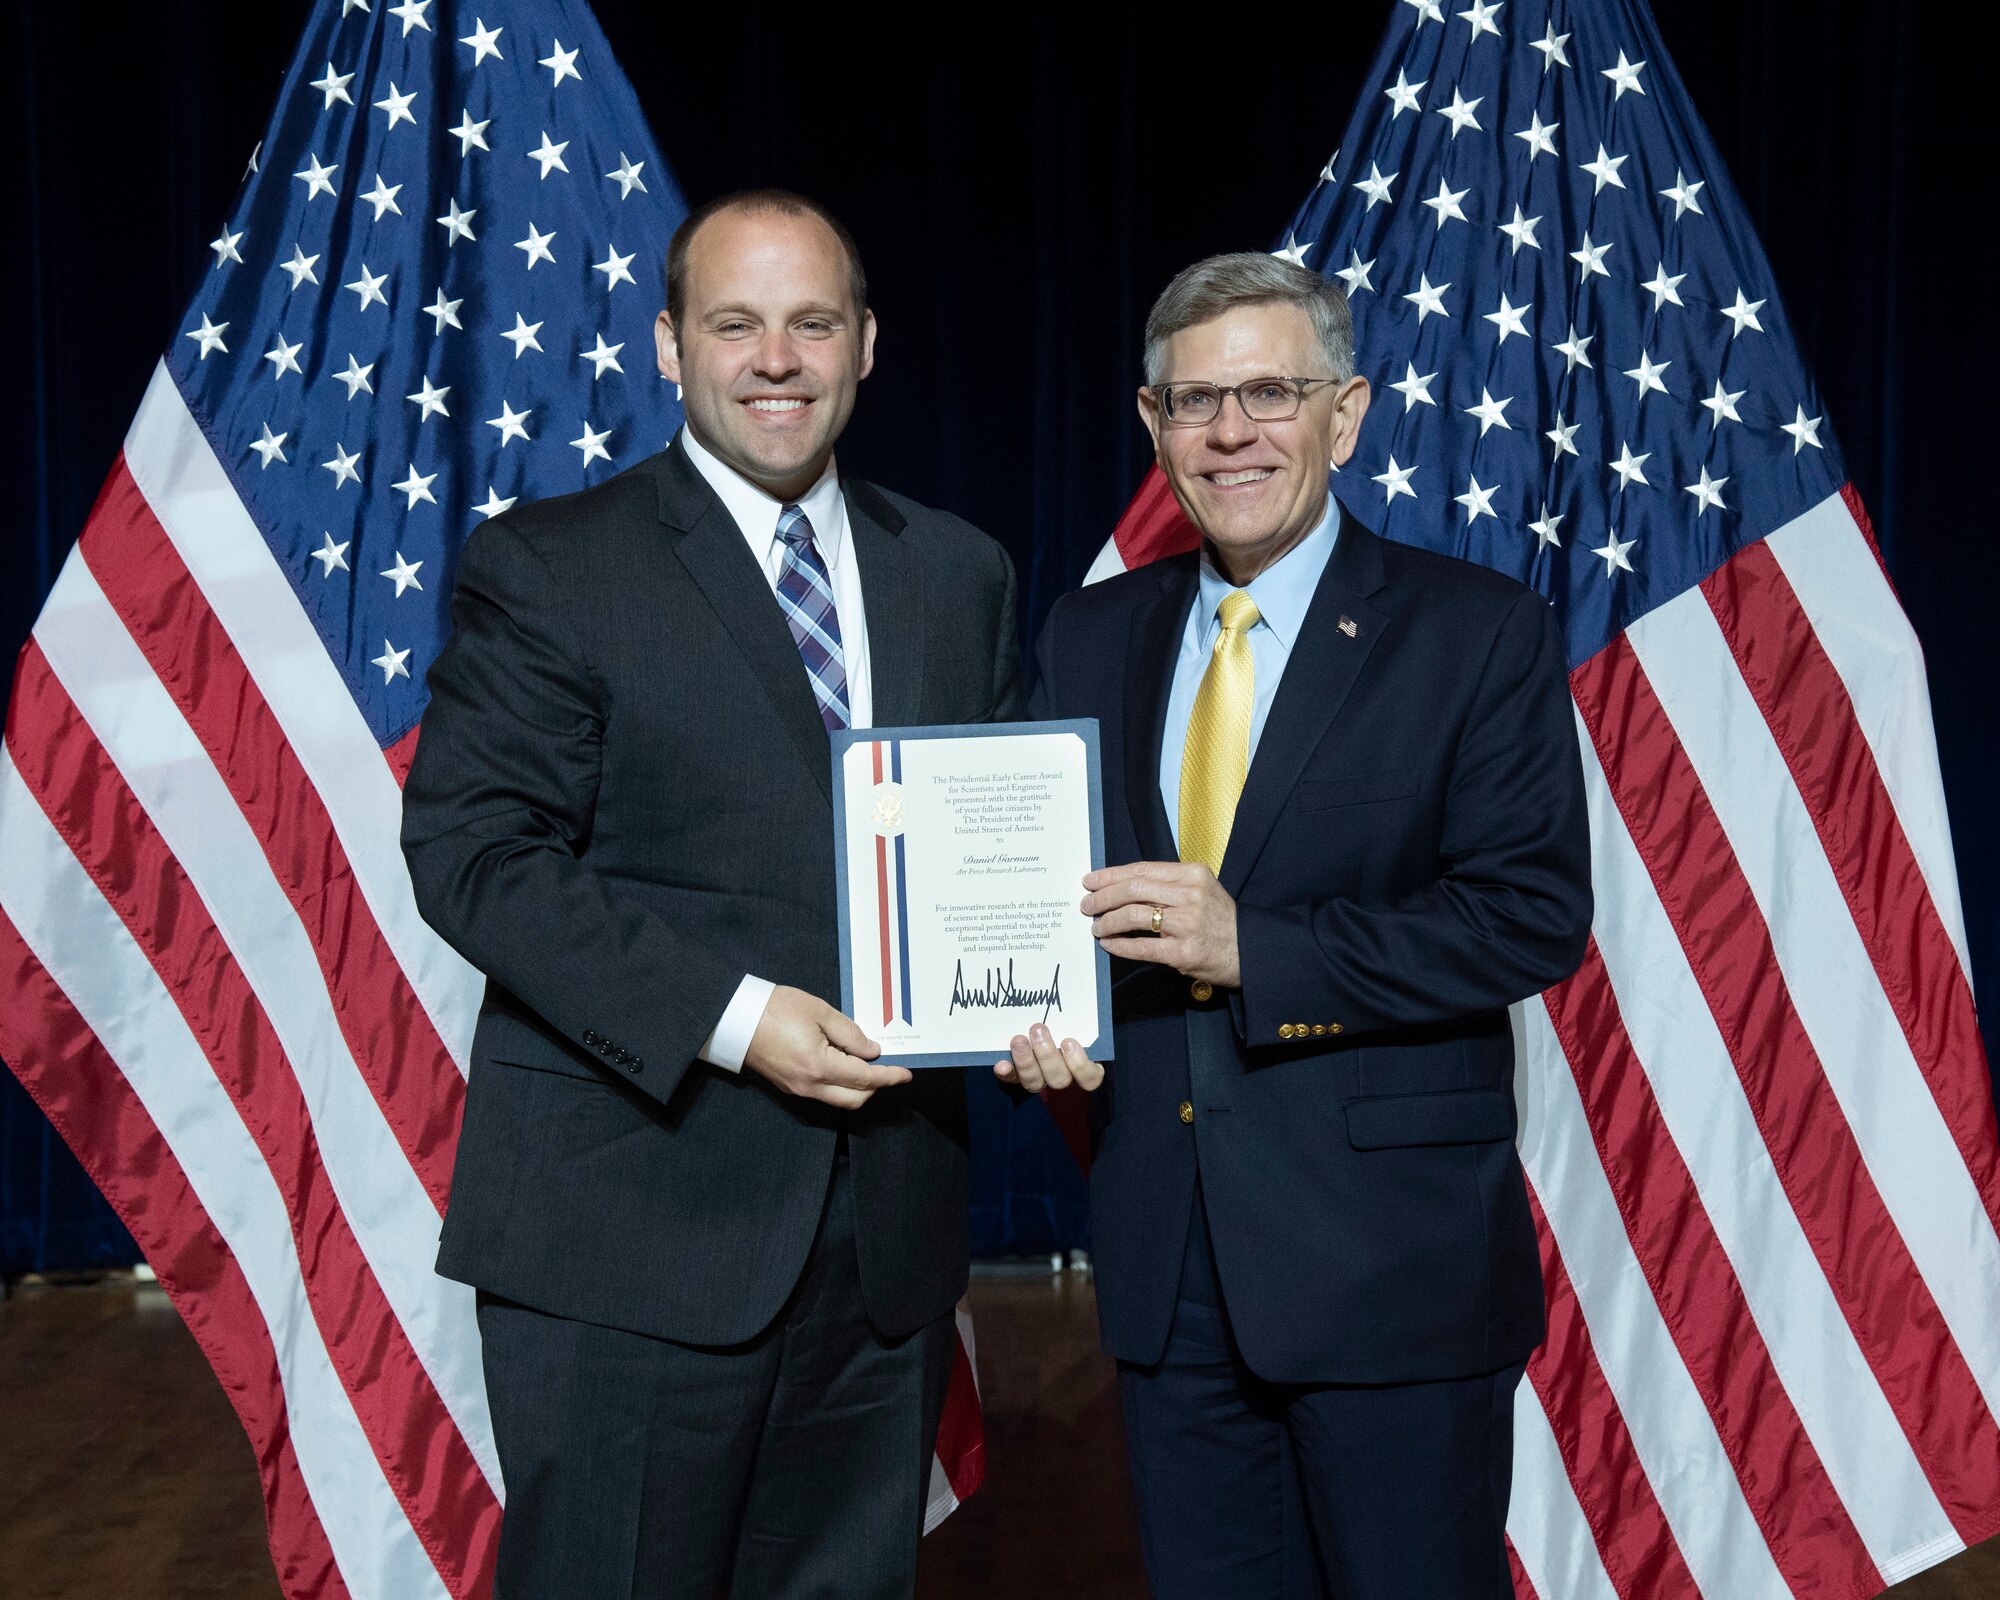 Dr. Daniel Garmann (left) received the Presidential Early Career Award for Scientists and Engineers from Kelvin Droegemeier, director of the Office of Science and Technology Policy, at a July 25, 2019, ceremony in Washington, DC.  (U.S. Department of Energy Photo/Donica Payne)